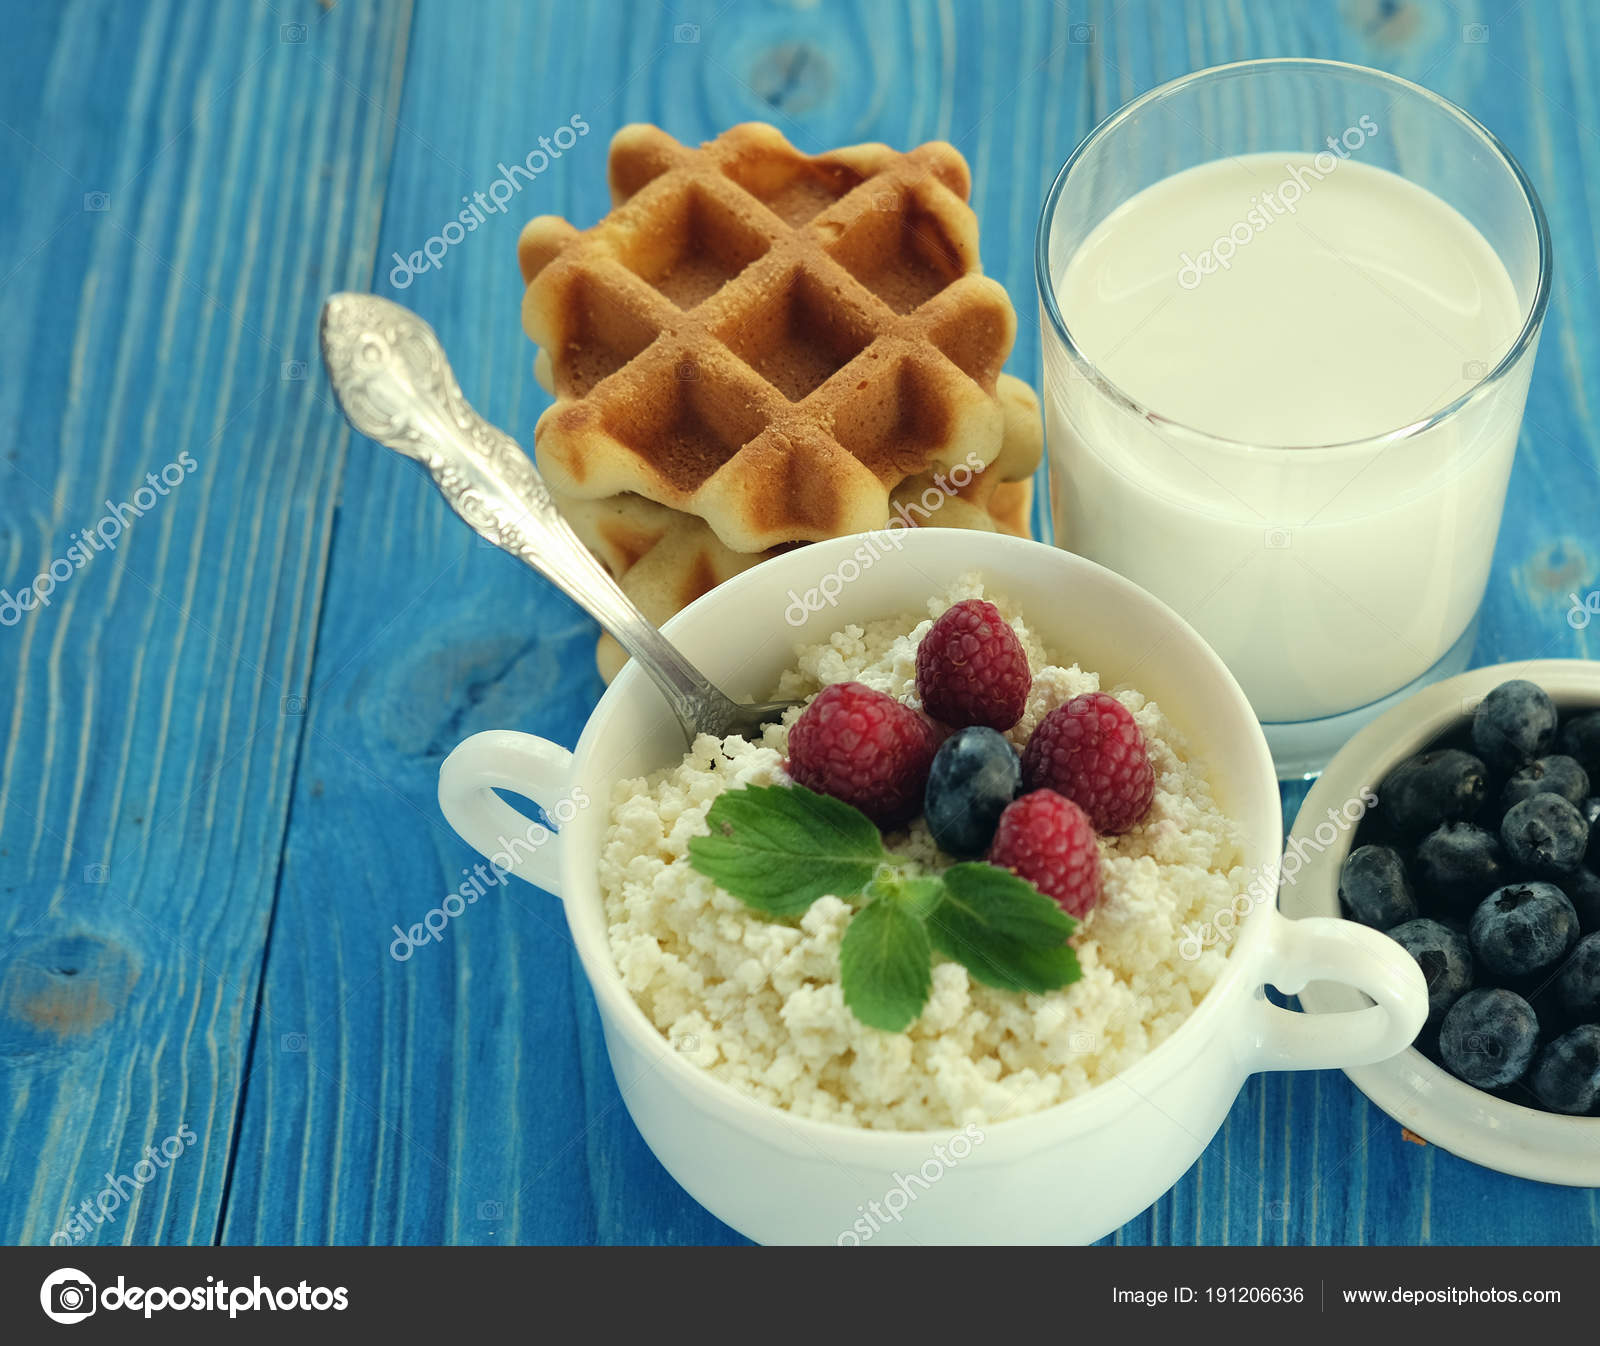 Cottage Cheese With Berries Waffles And Milk On A Wooden Blue